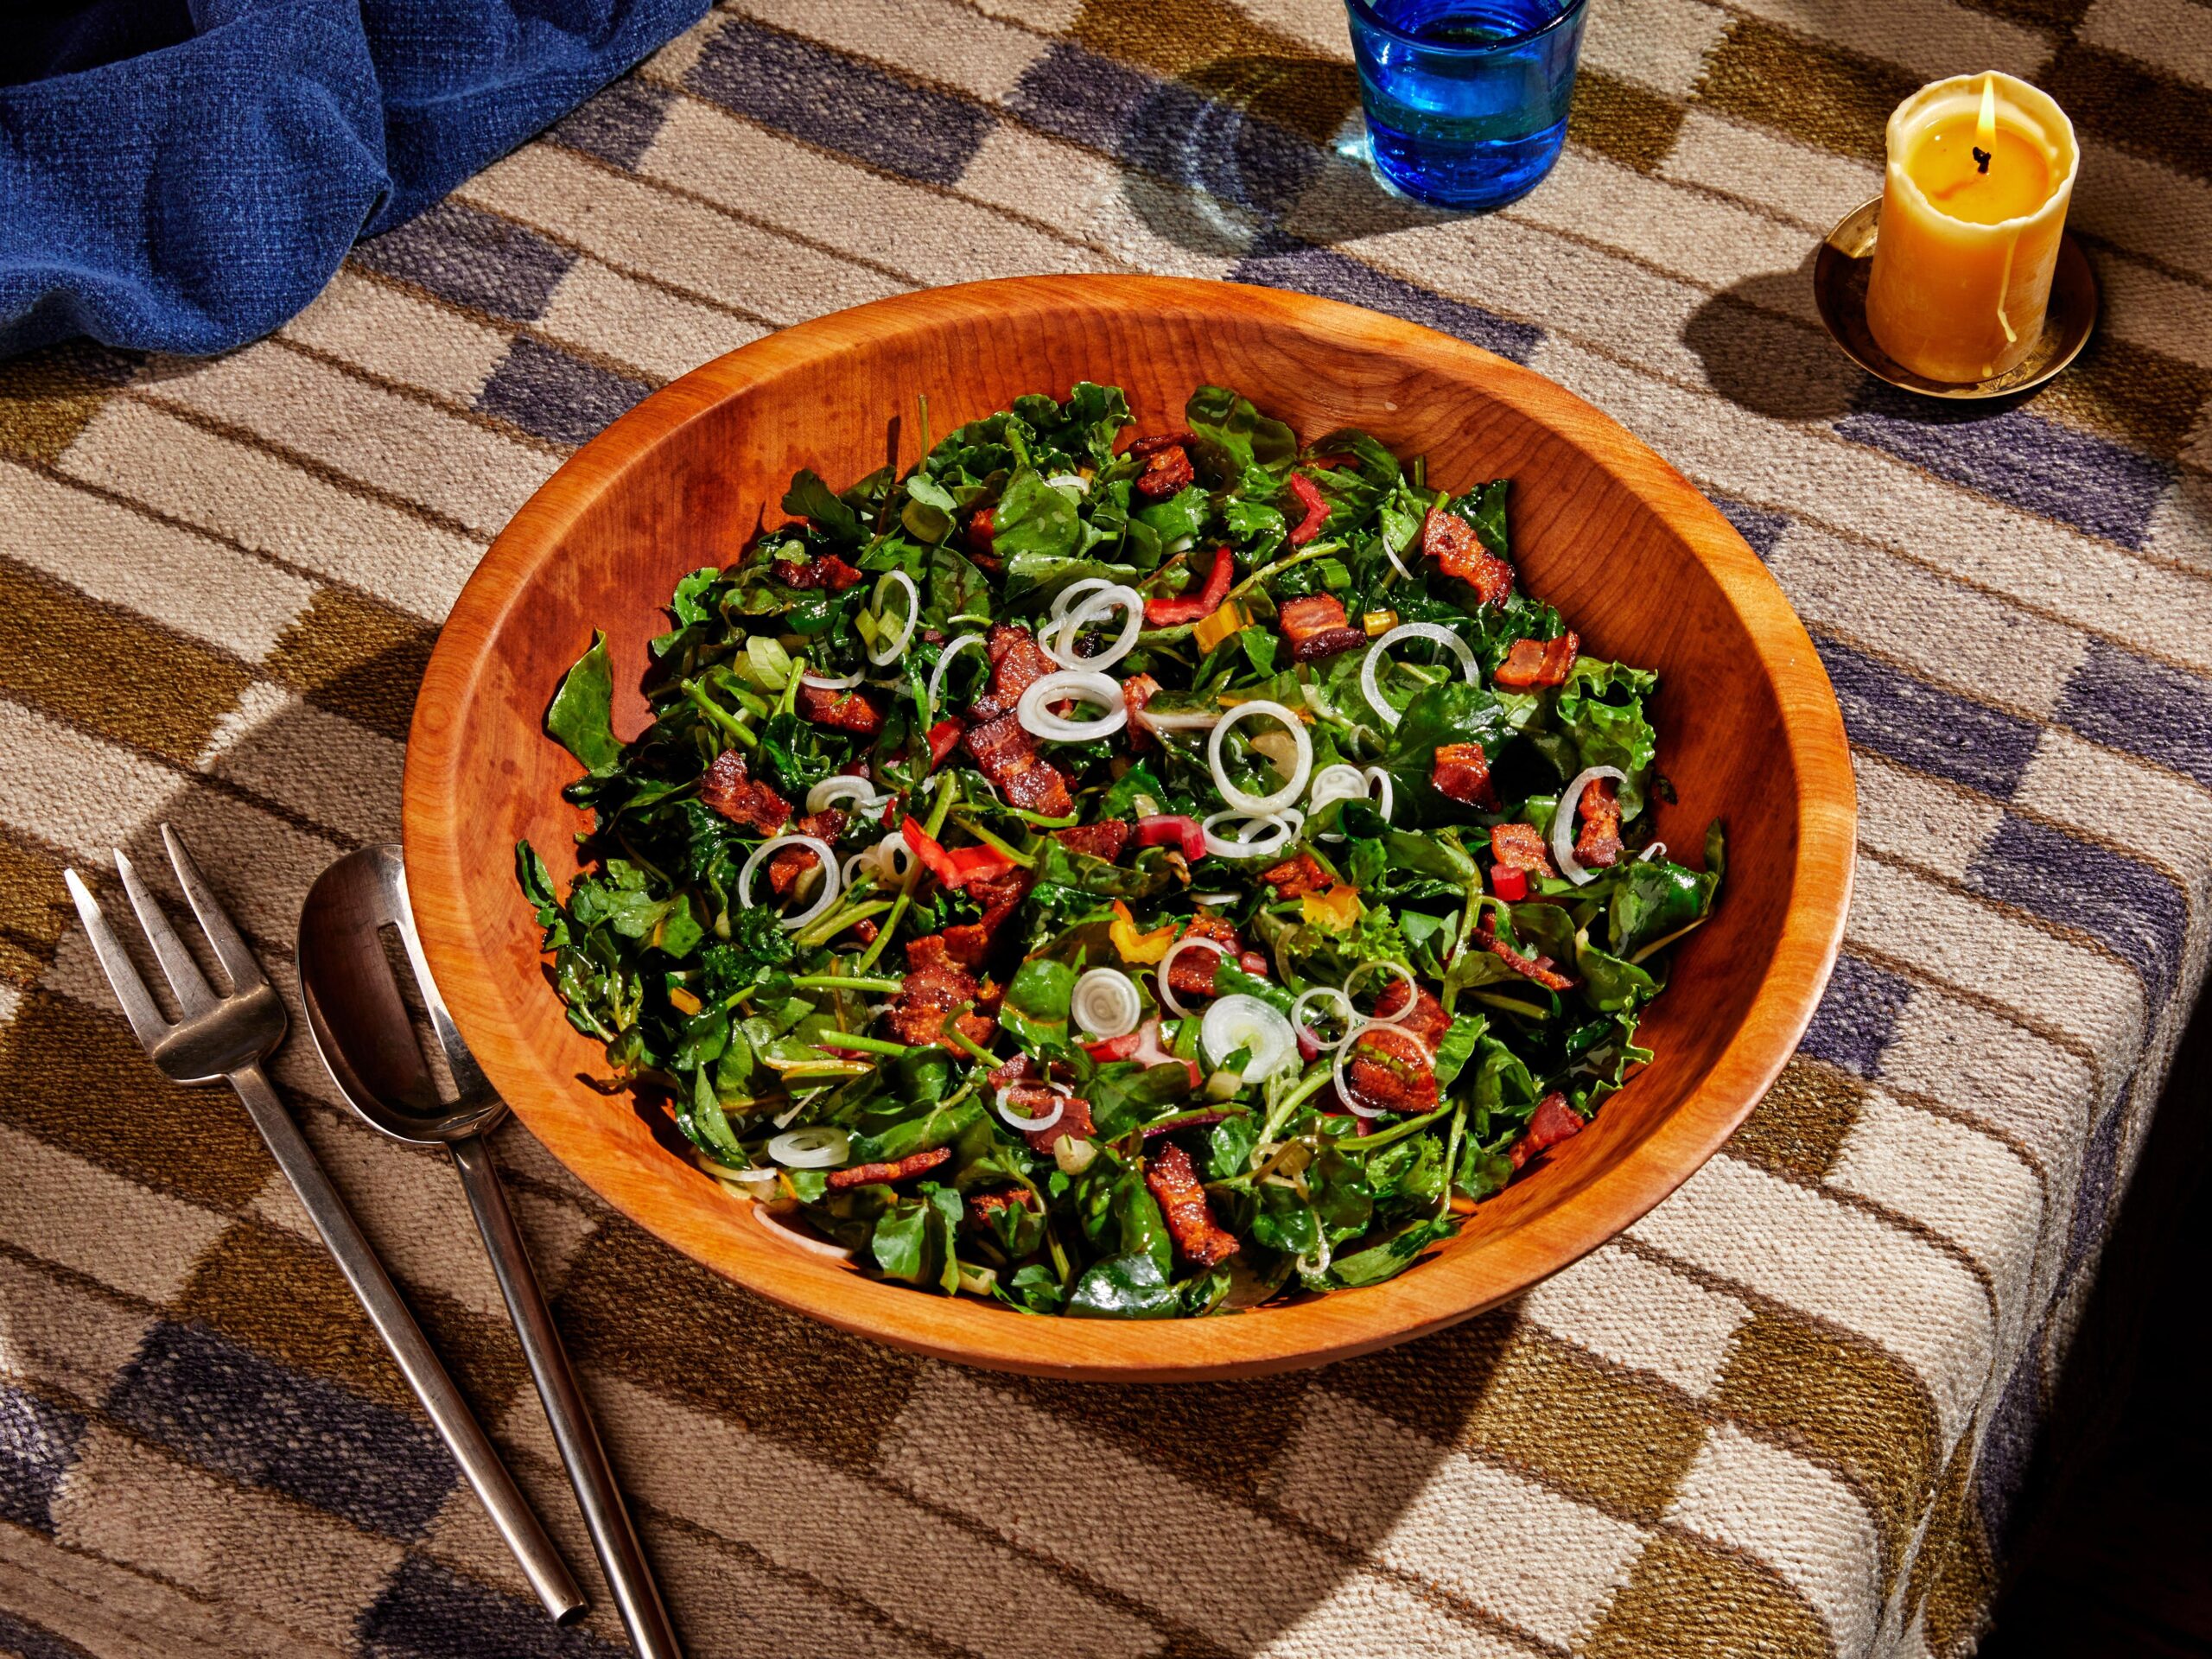  A refreshing salad that packs a punch of flavor with every bite